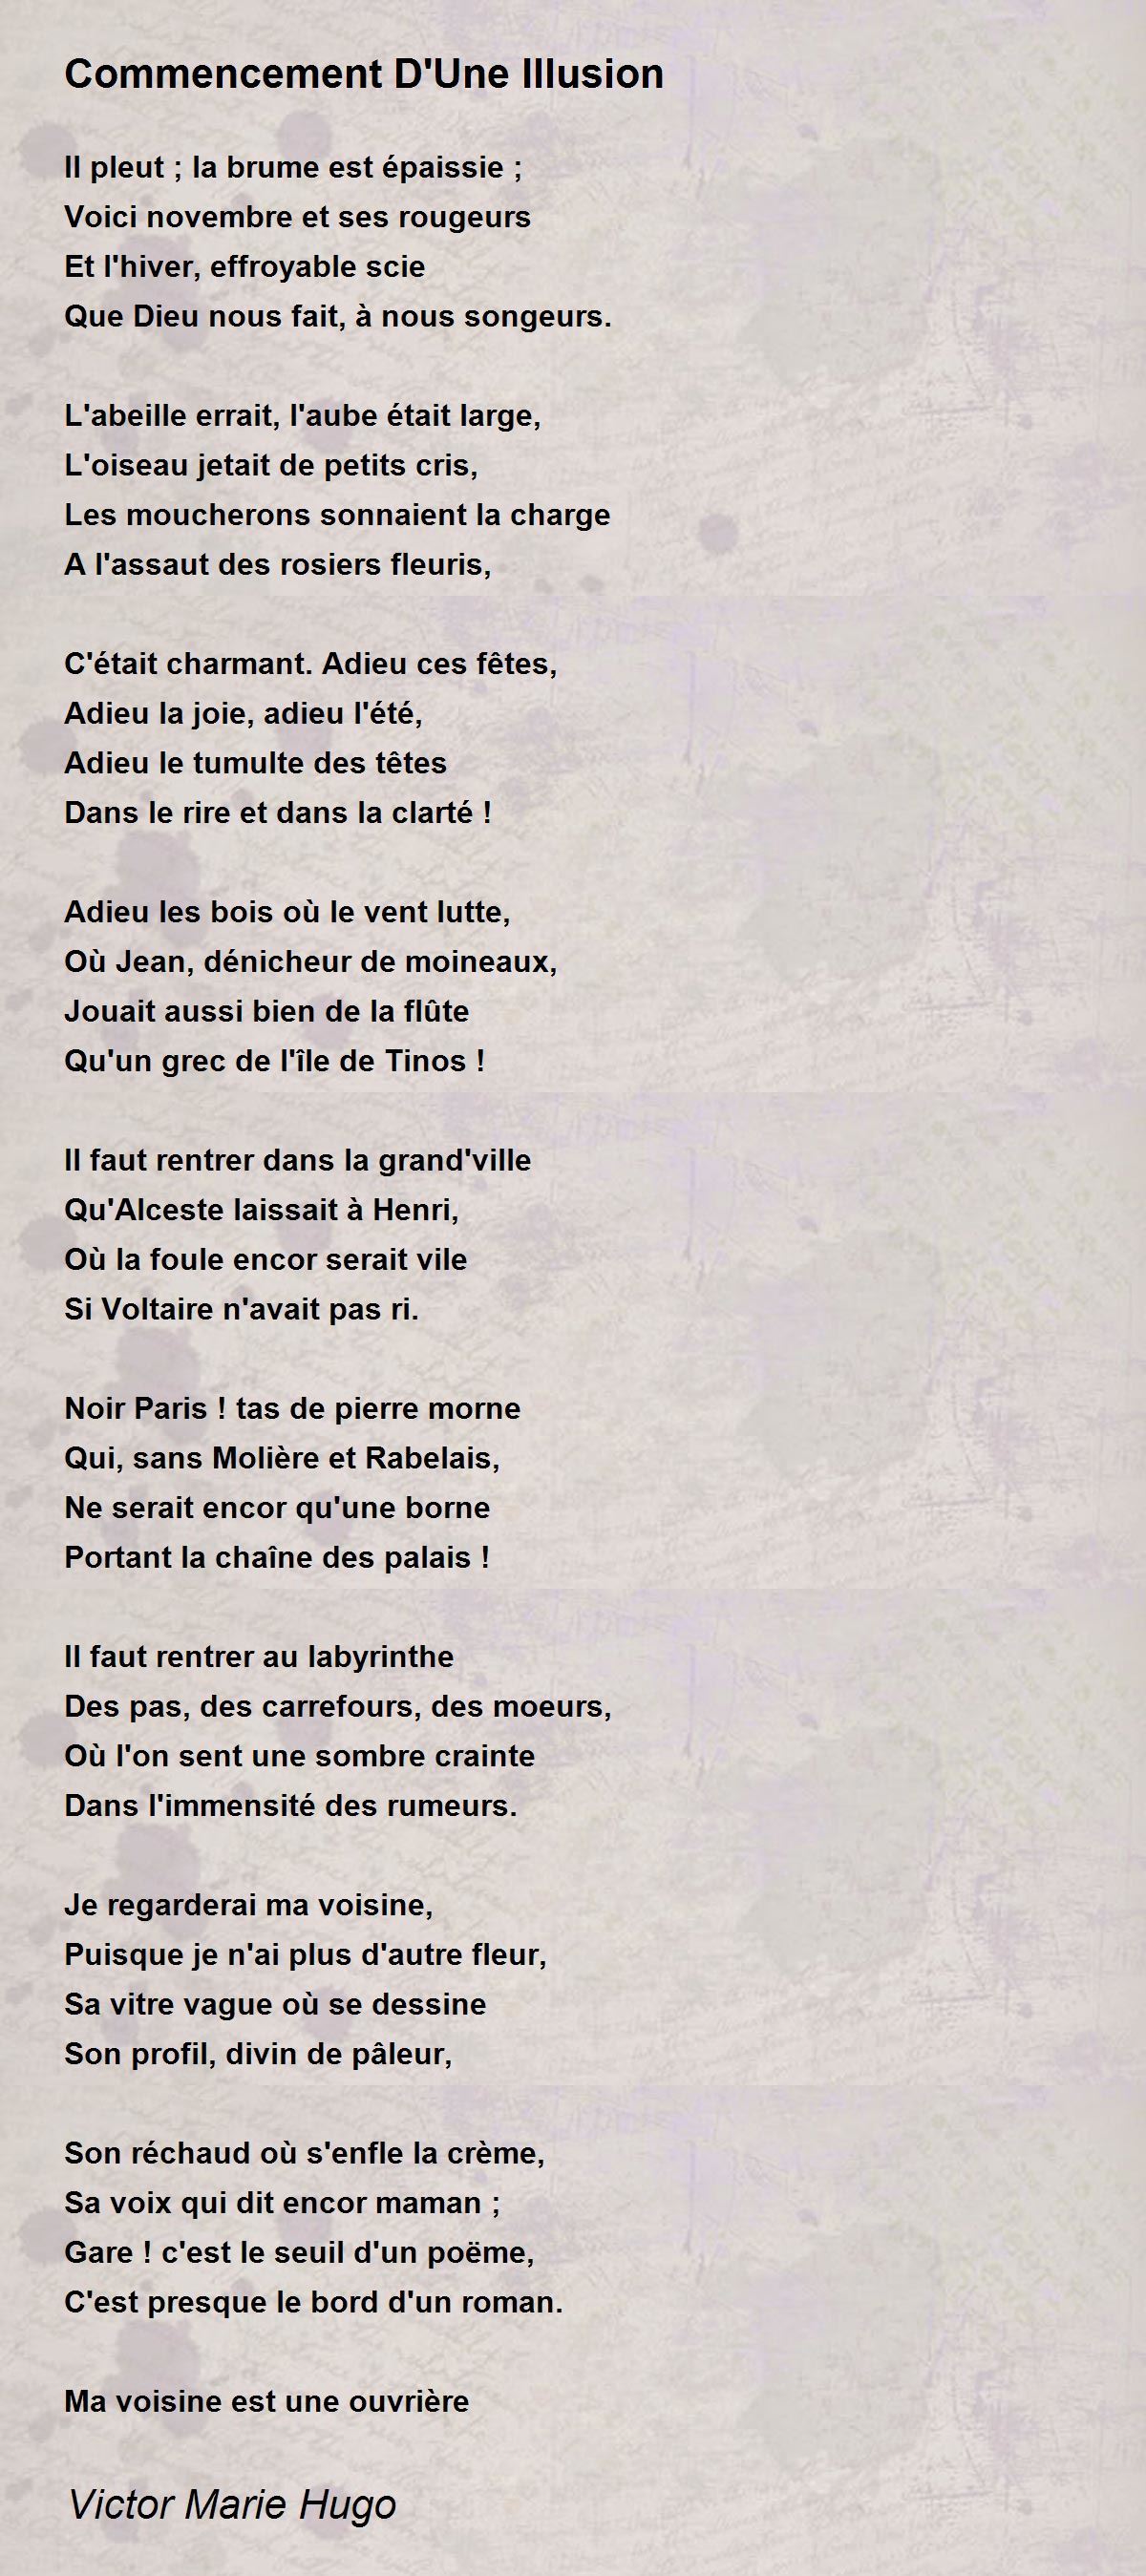 Commencement D'Une Illusion Poem by Victor Marie Hugo - Poem Hunter